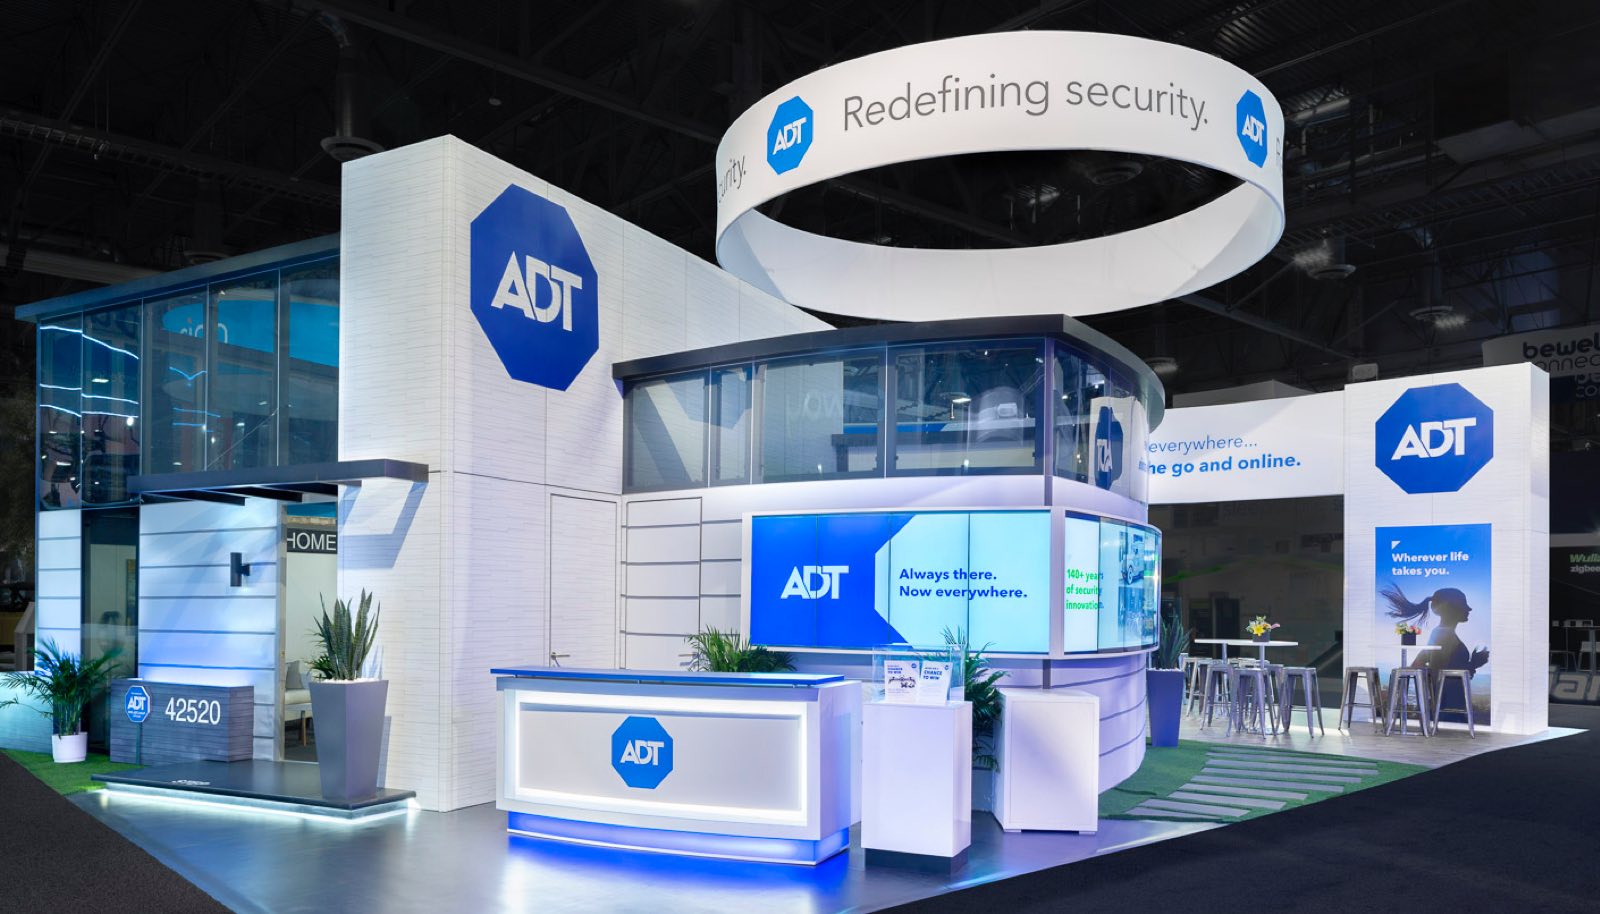 ADT booth at CES 2018